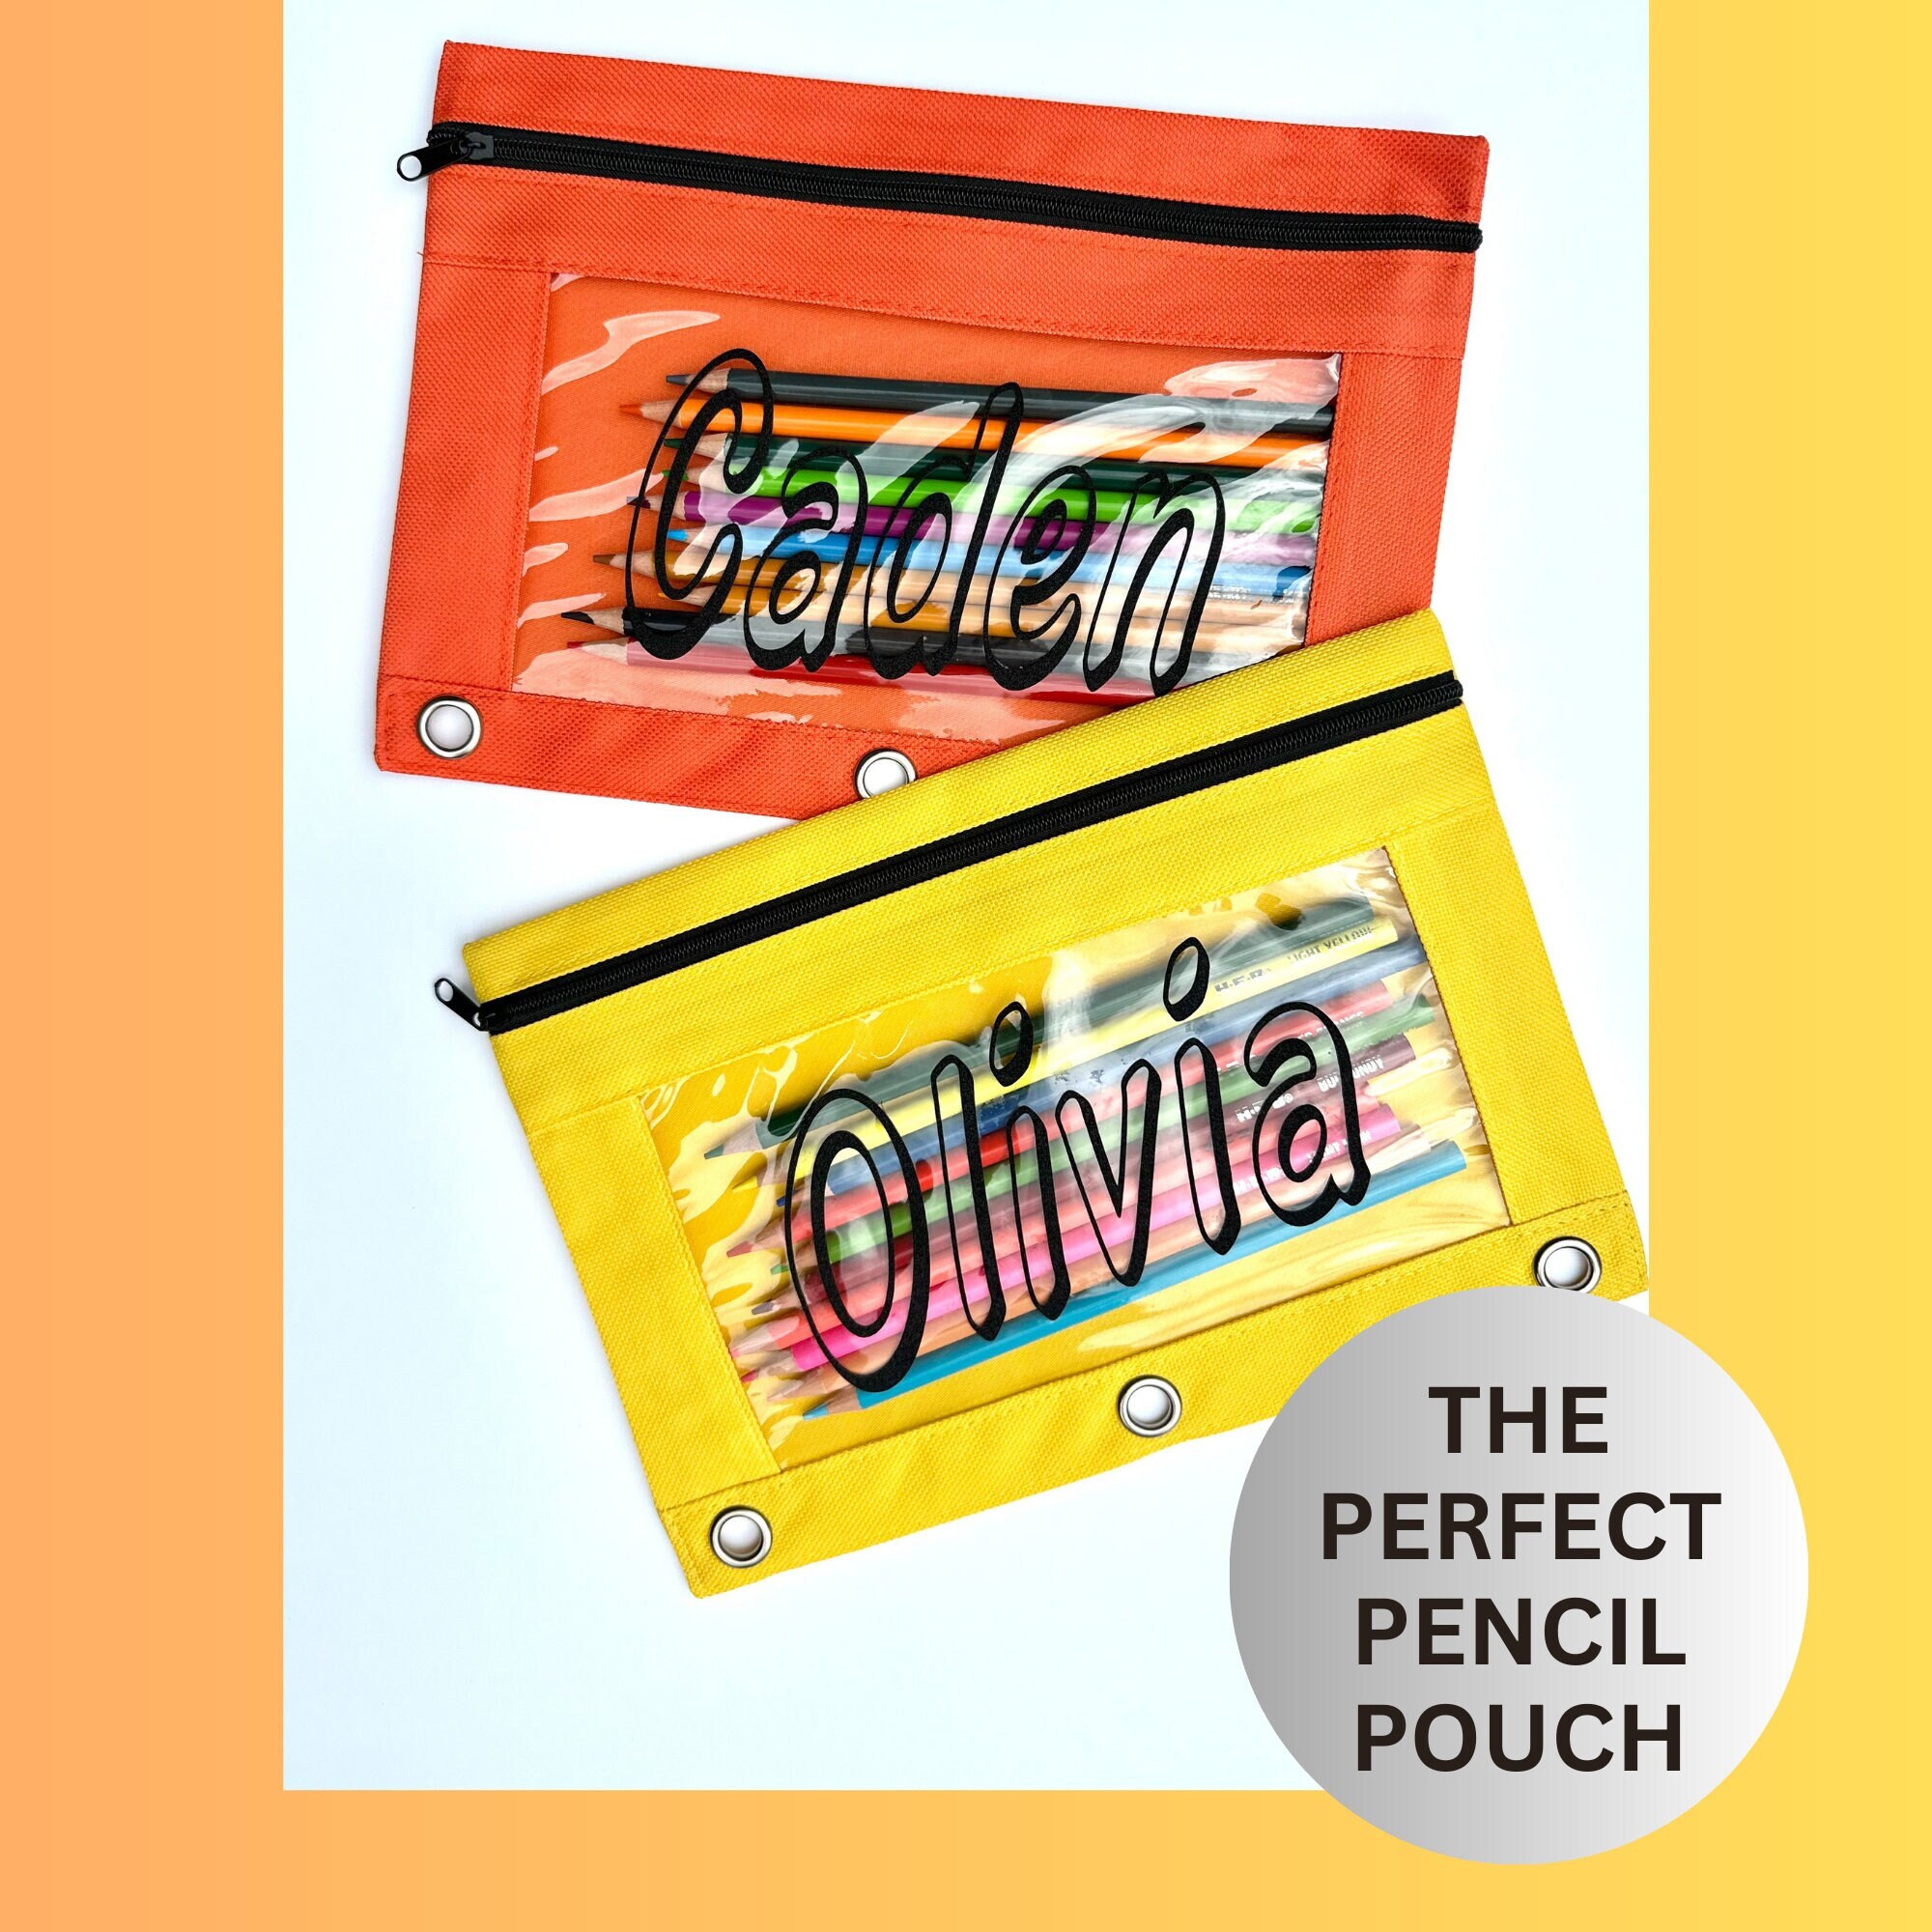 Cheers US 4pcs/set Small Pencil Case Student Pencil Pouch Coin Pouch  Cosmetic Bag Office Stationery Organizer for Teen School